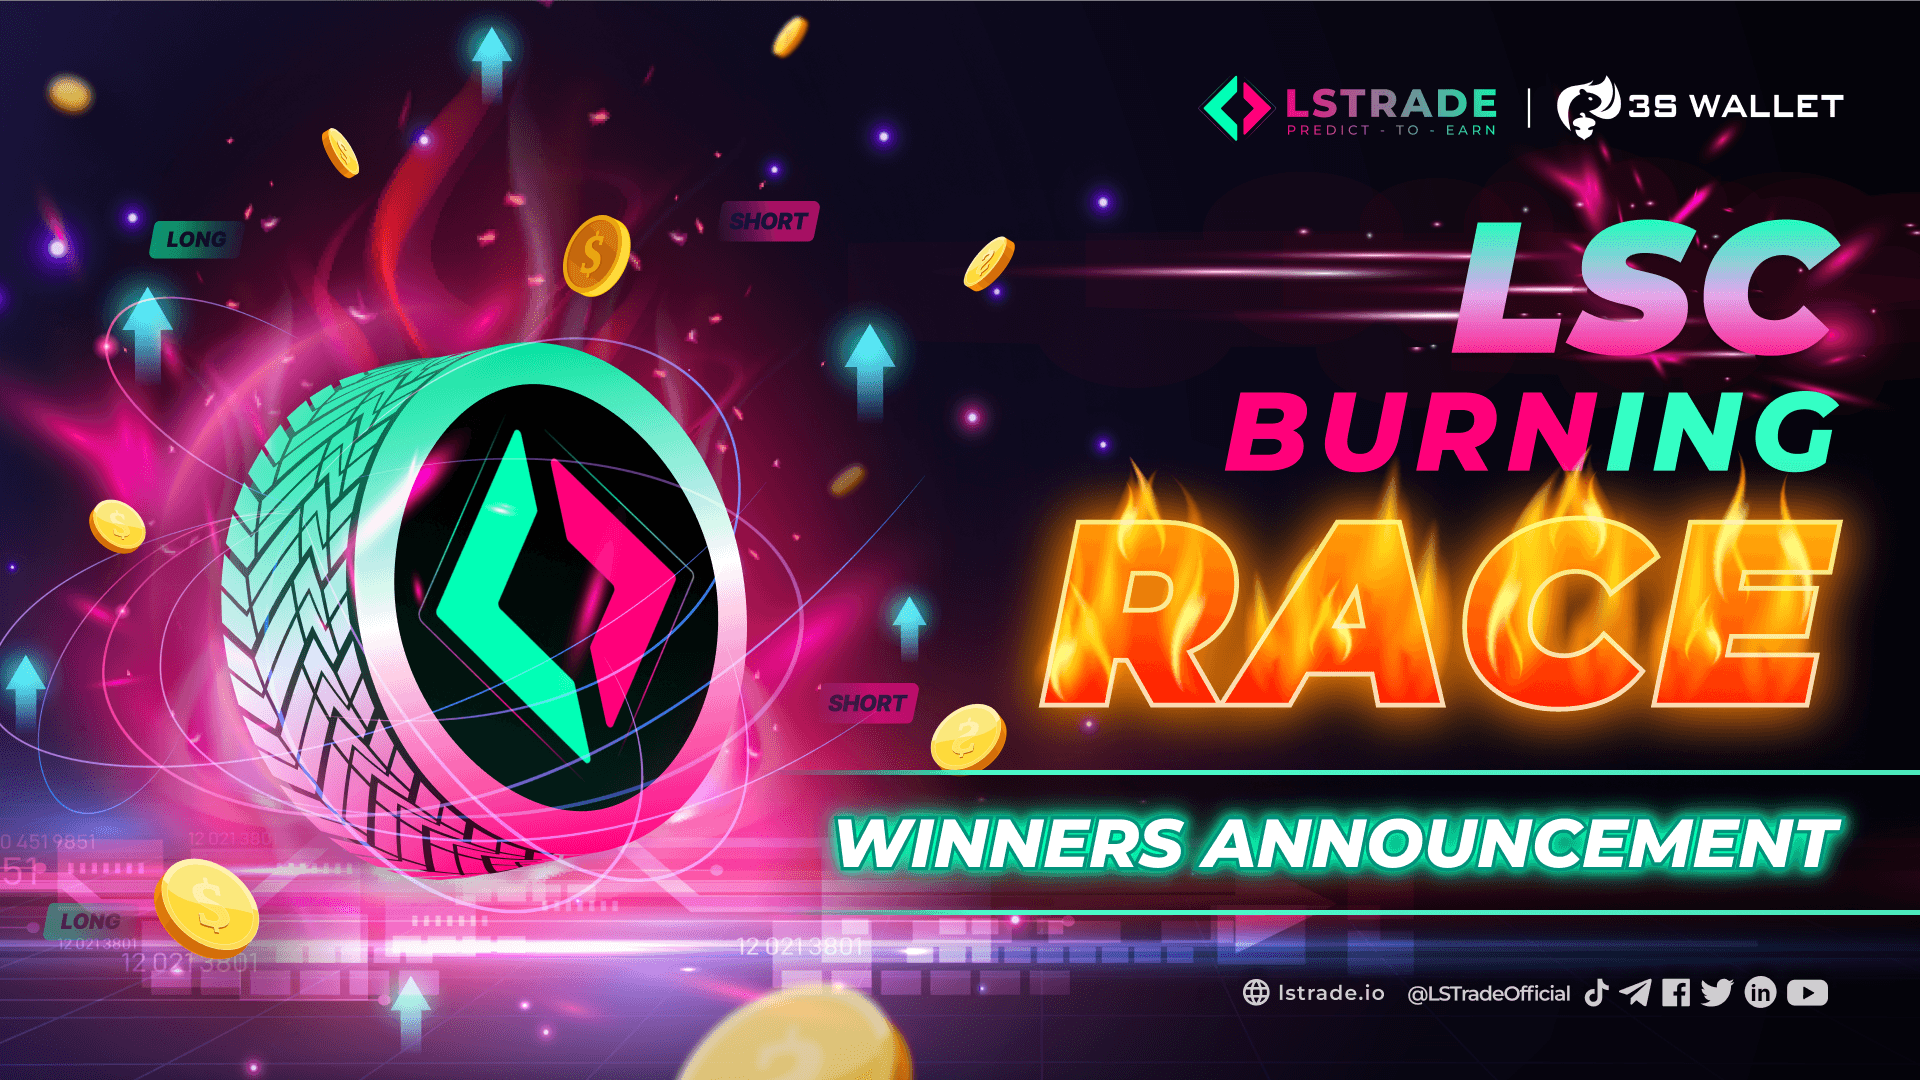 LS TRADE’S "BURNING RACE" WINNERS ANNOUNCEMENT 🔥